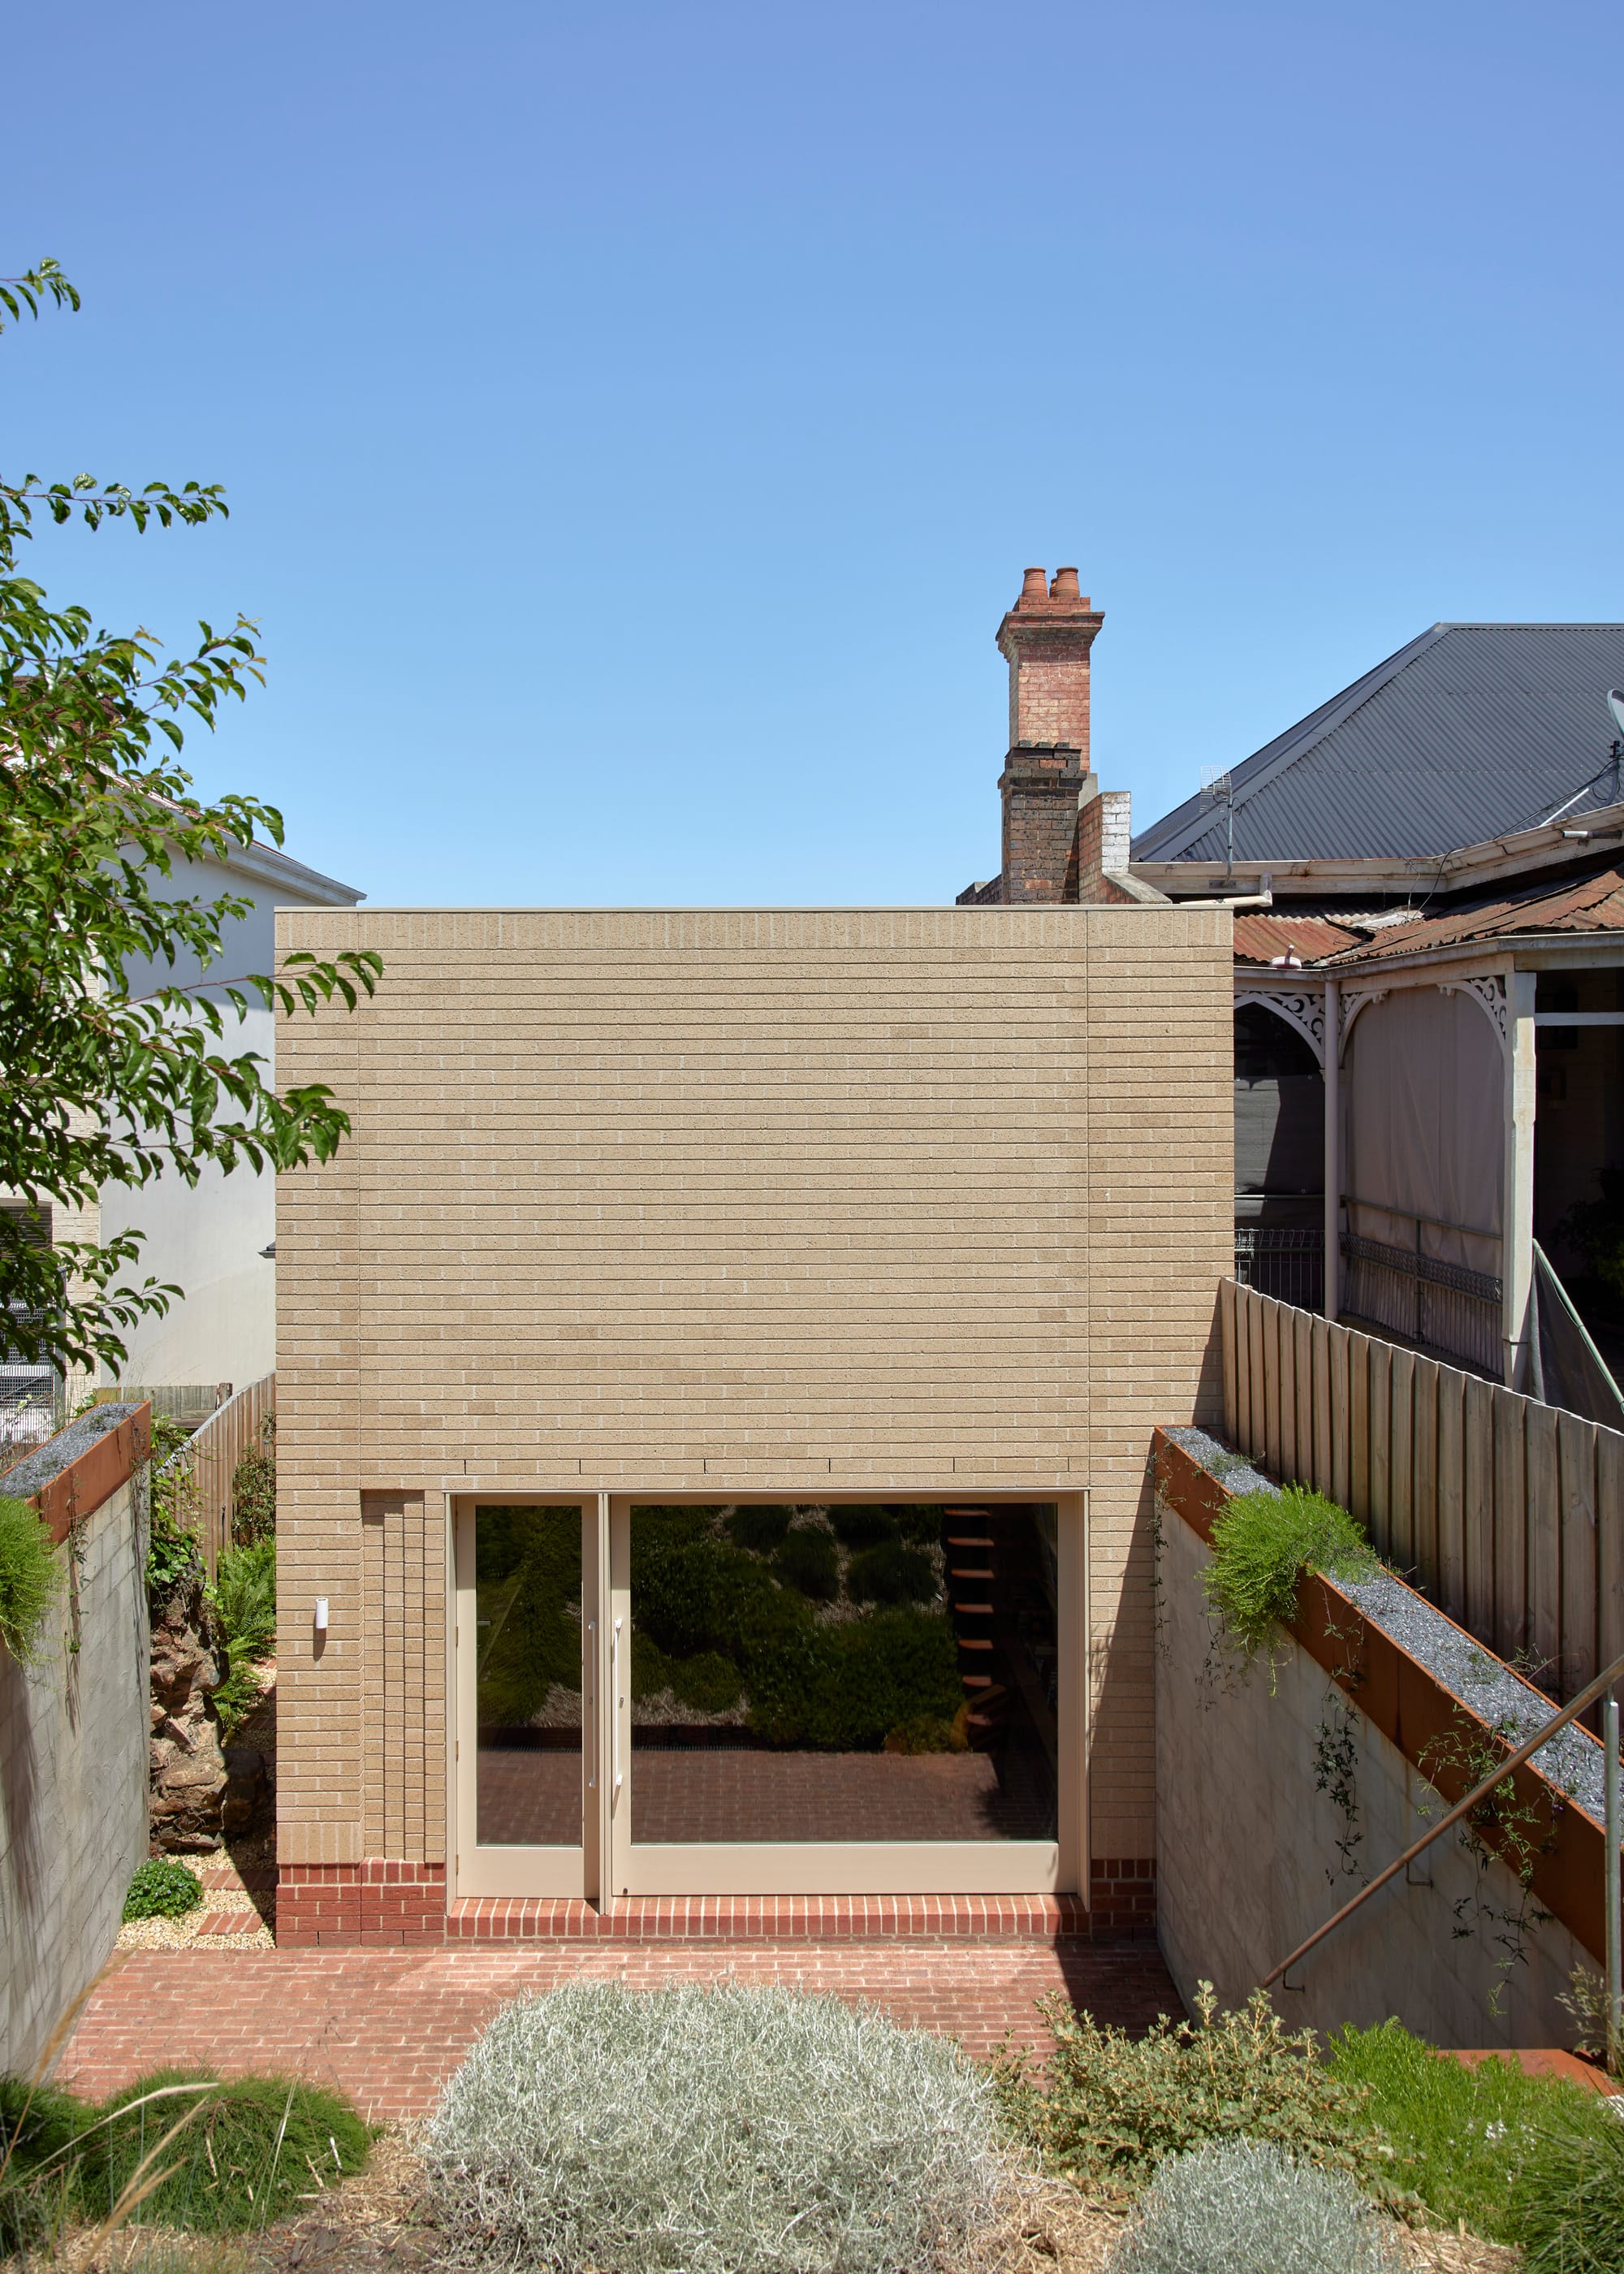 Harriet's House by SO:Architecture. Photography by Sean Fennessy. Rear facade of home. Pale brick single story home with tall concrete-block fences and lush gardens in the foreground.